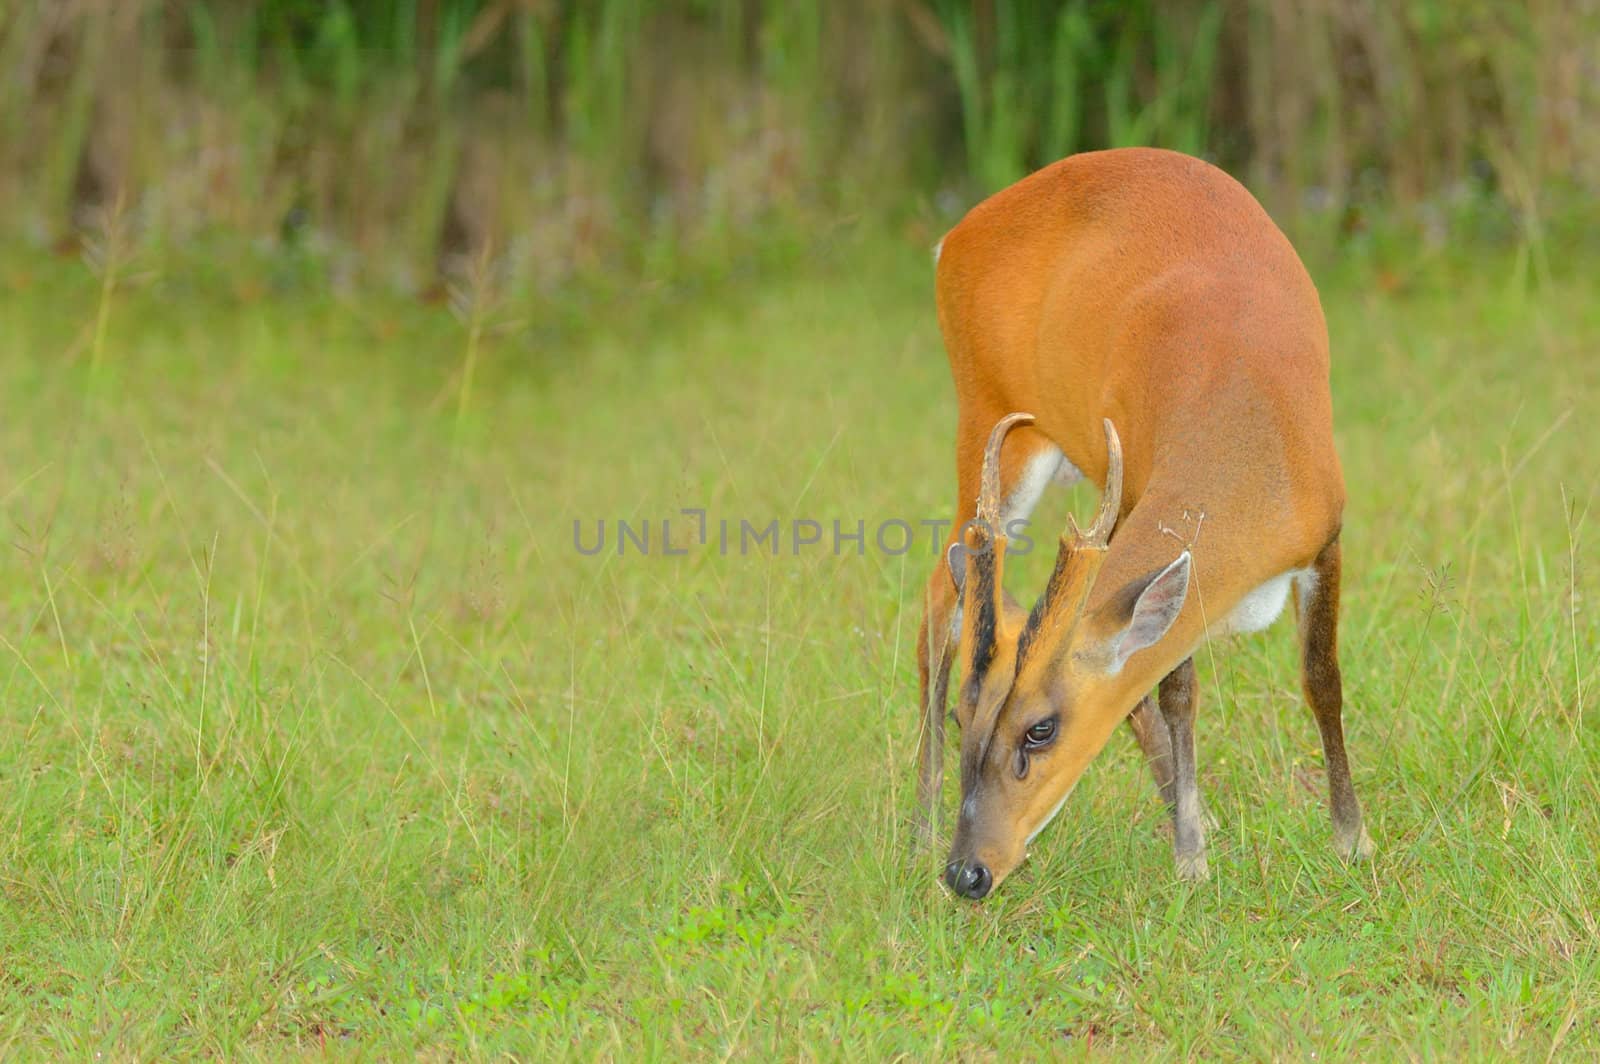 The little deer nibble grass. by ngungfoto